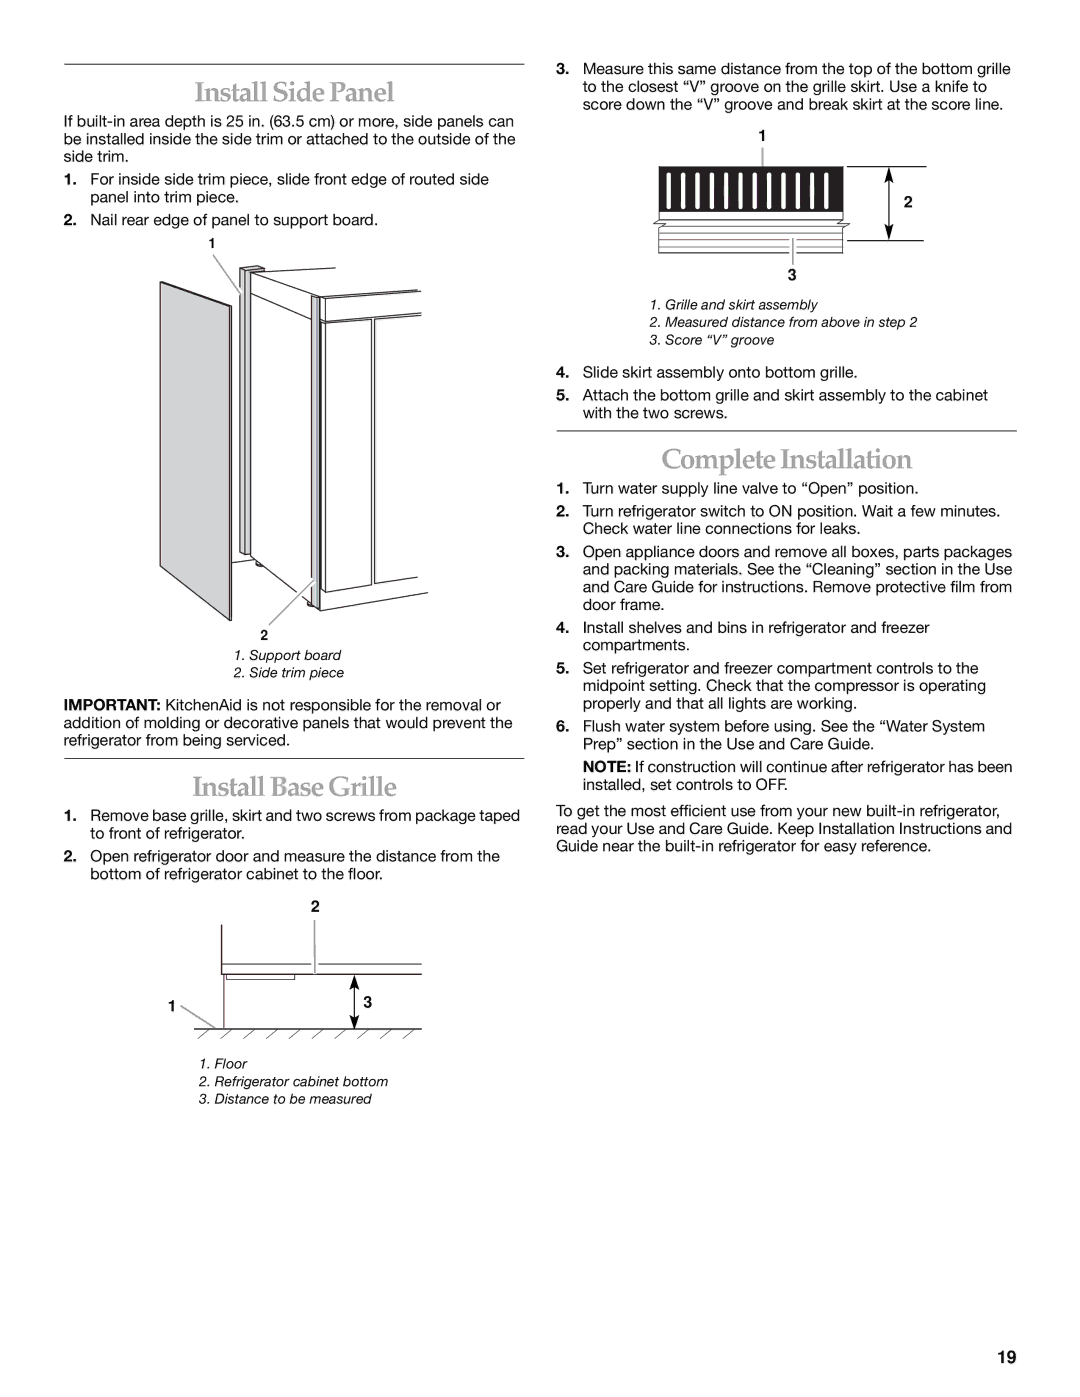 KitchenAid 2266877 manual Install Side Panel, Install Base Grille, Complete Installation 